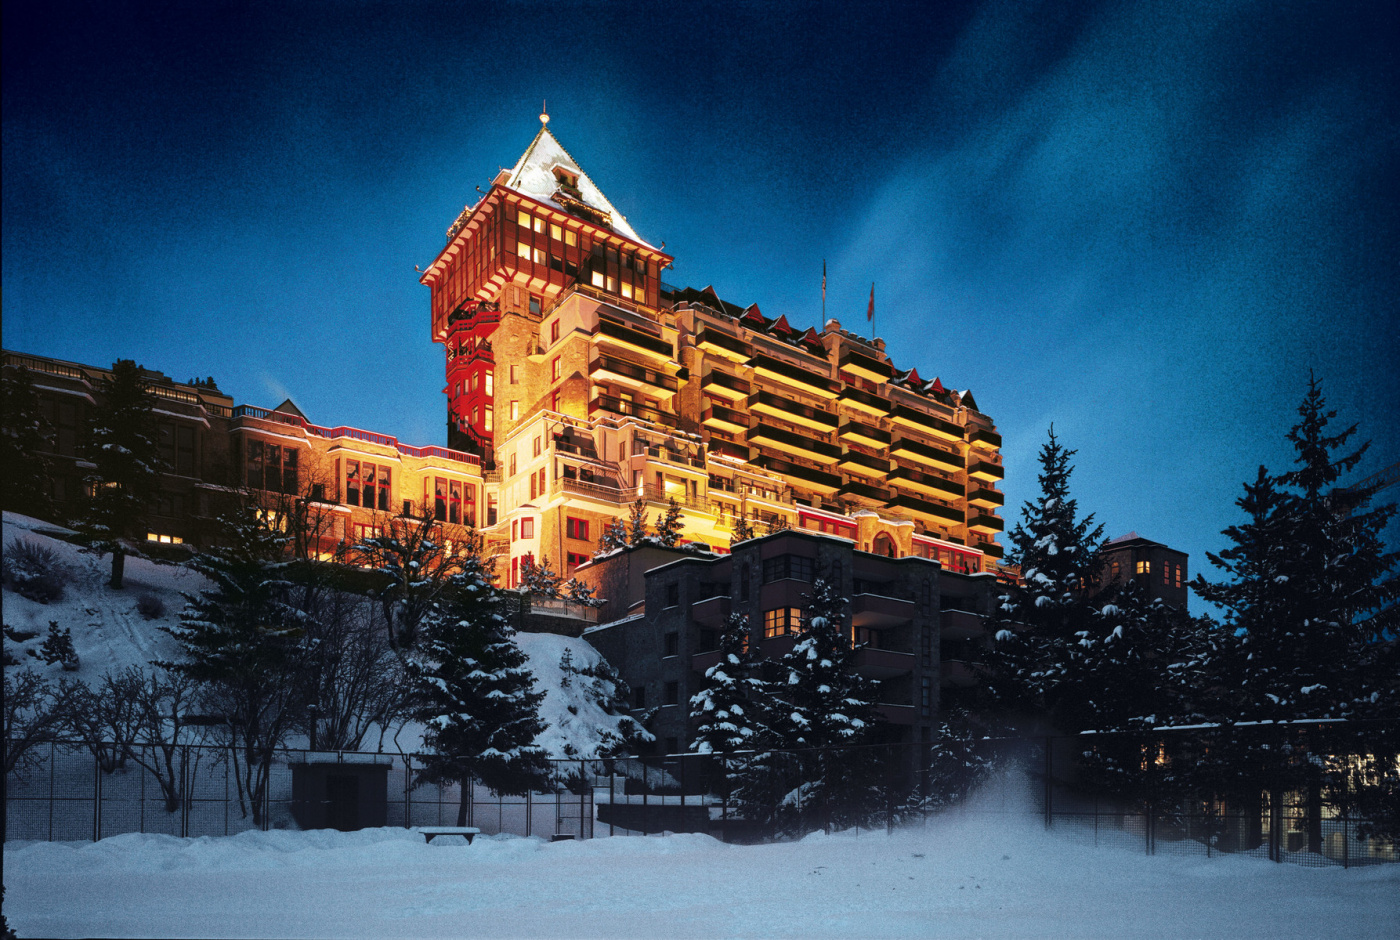 Night view under the snow of historic luxury wedding palace in Saint Moritz